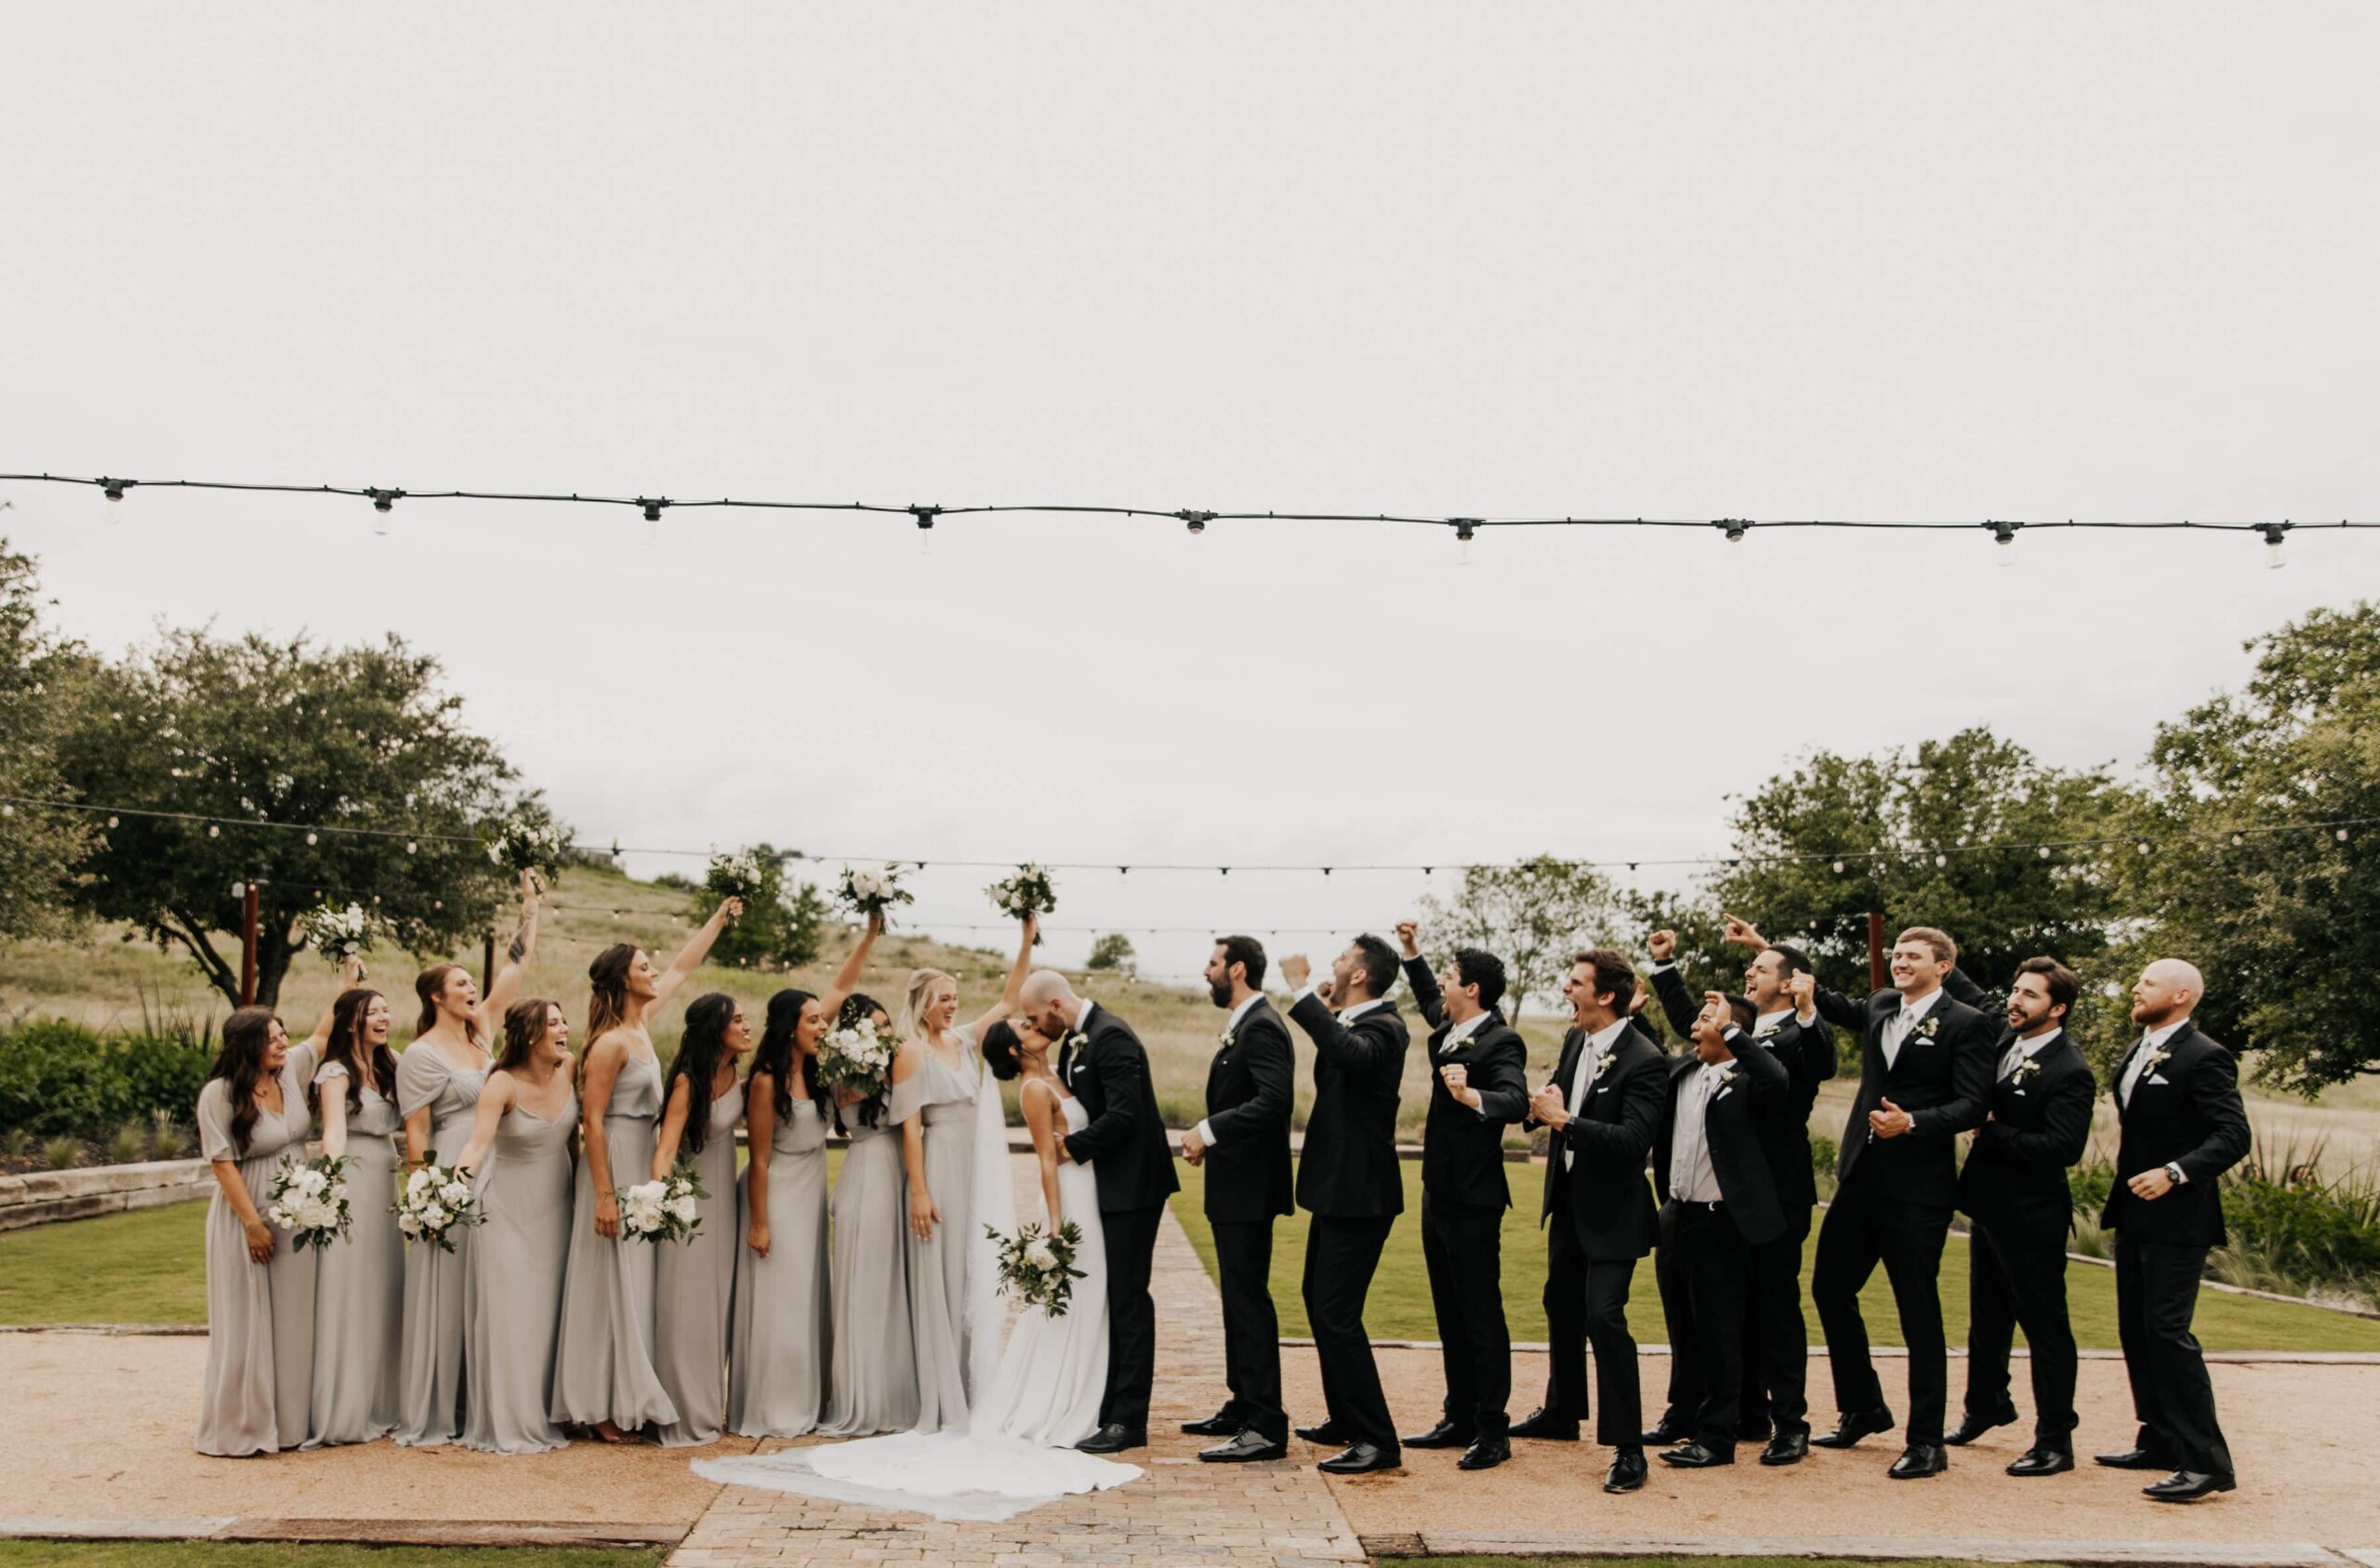 Sophia and Grant's Wedding at Two Wishes Ranch